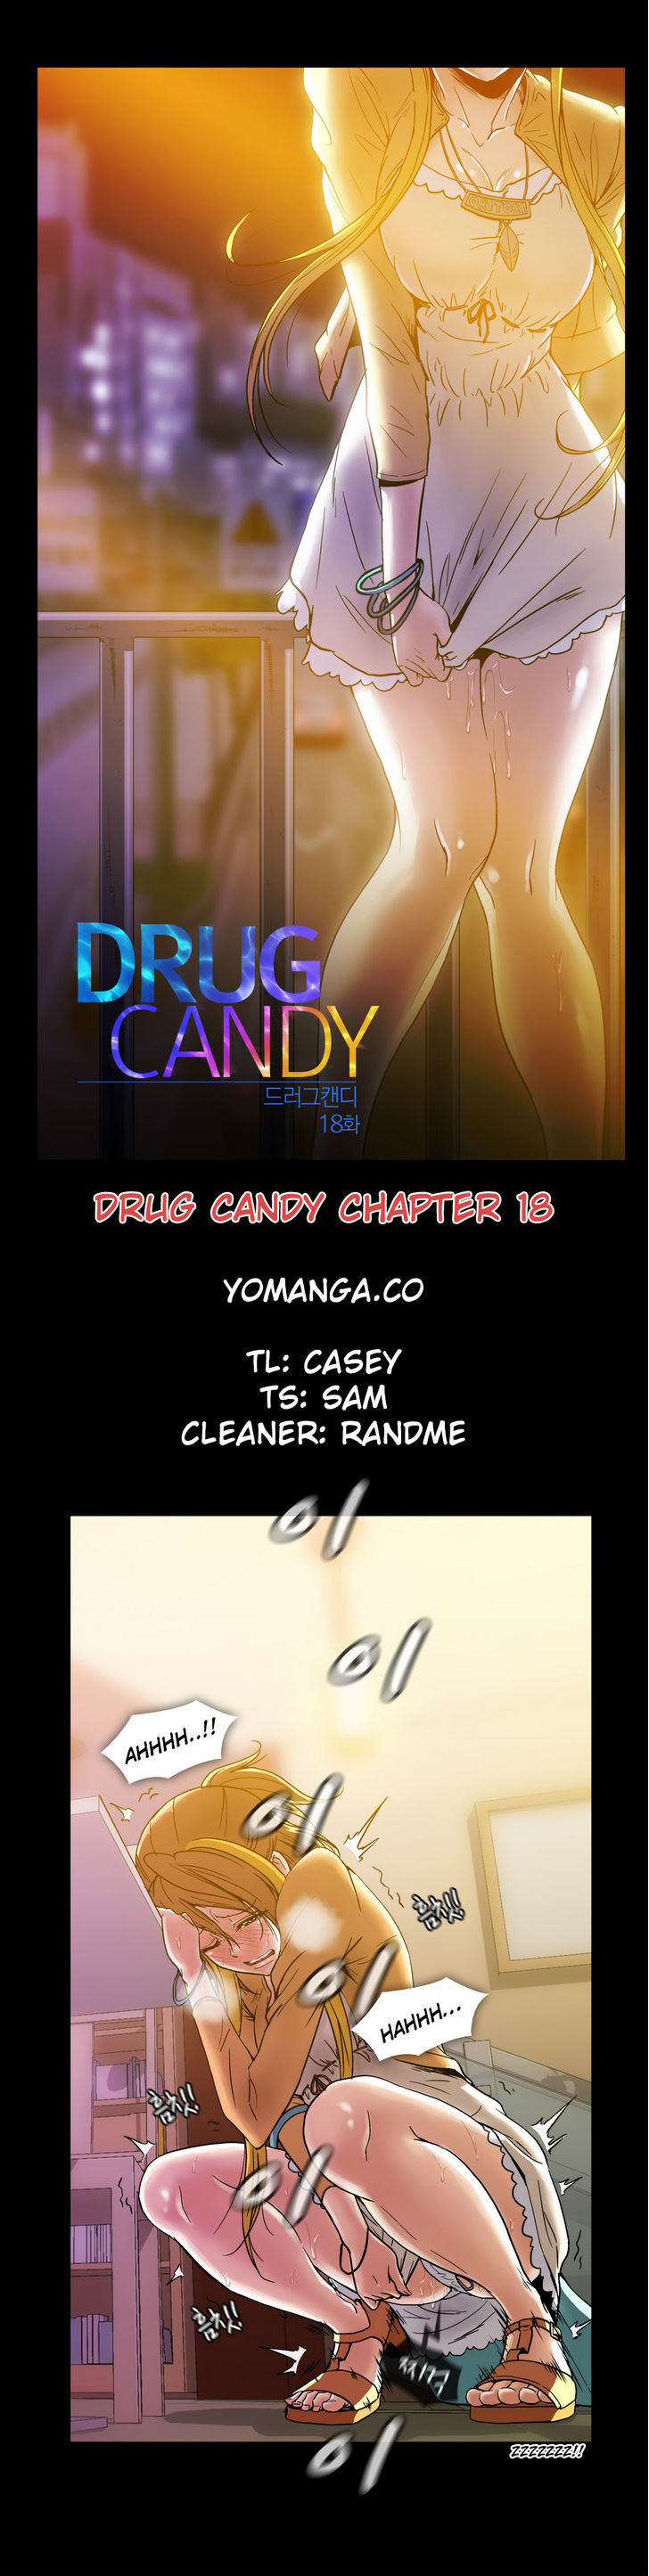 Drug Candy - Chapter 18 Page 1